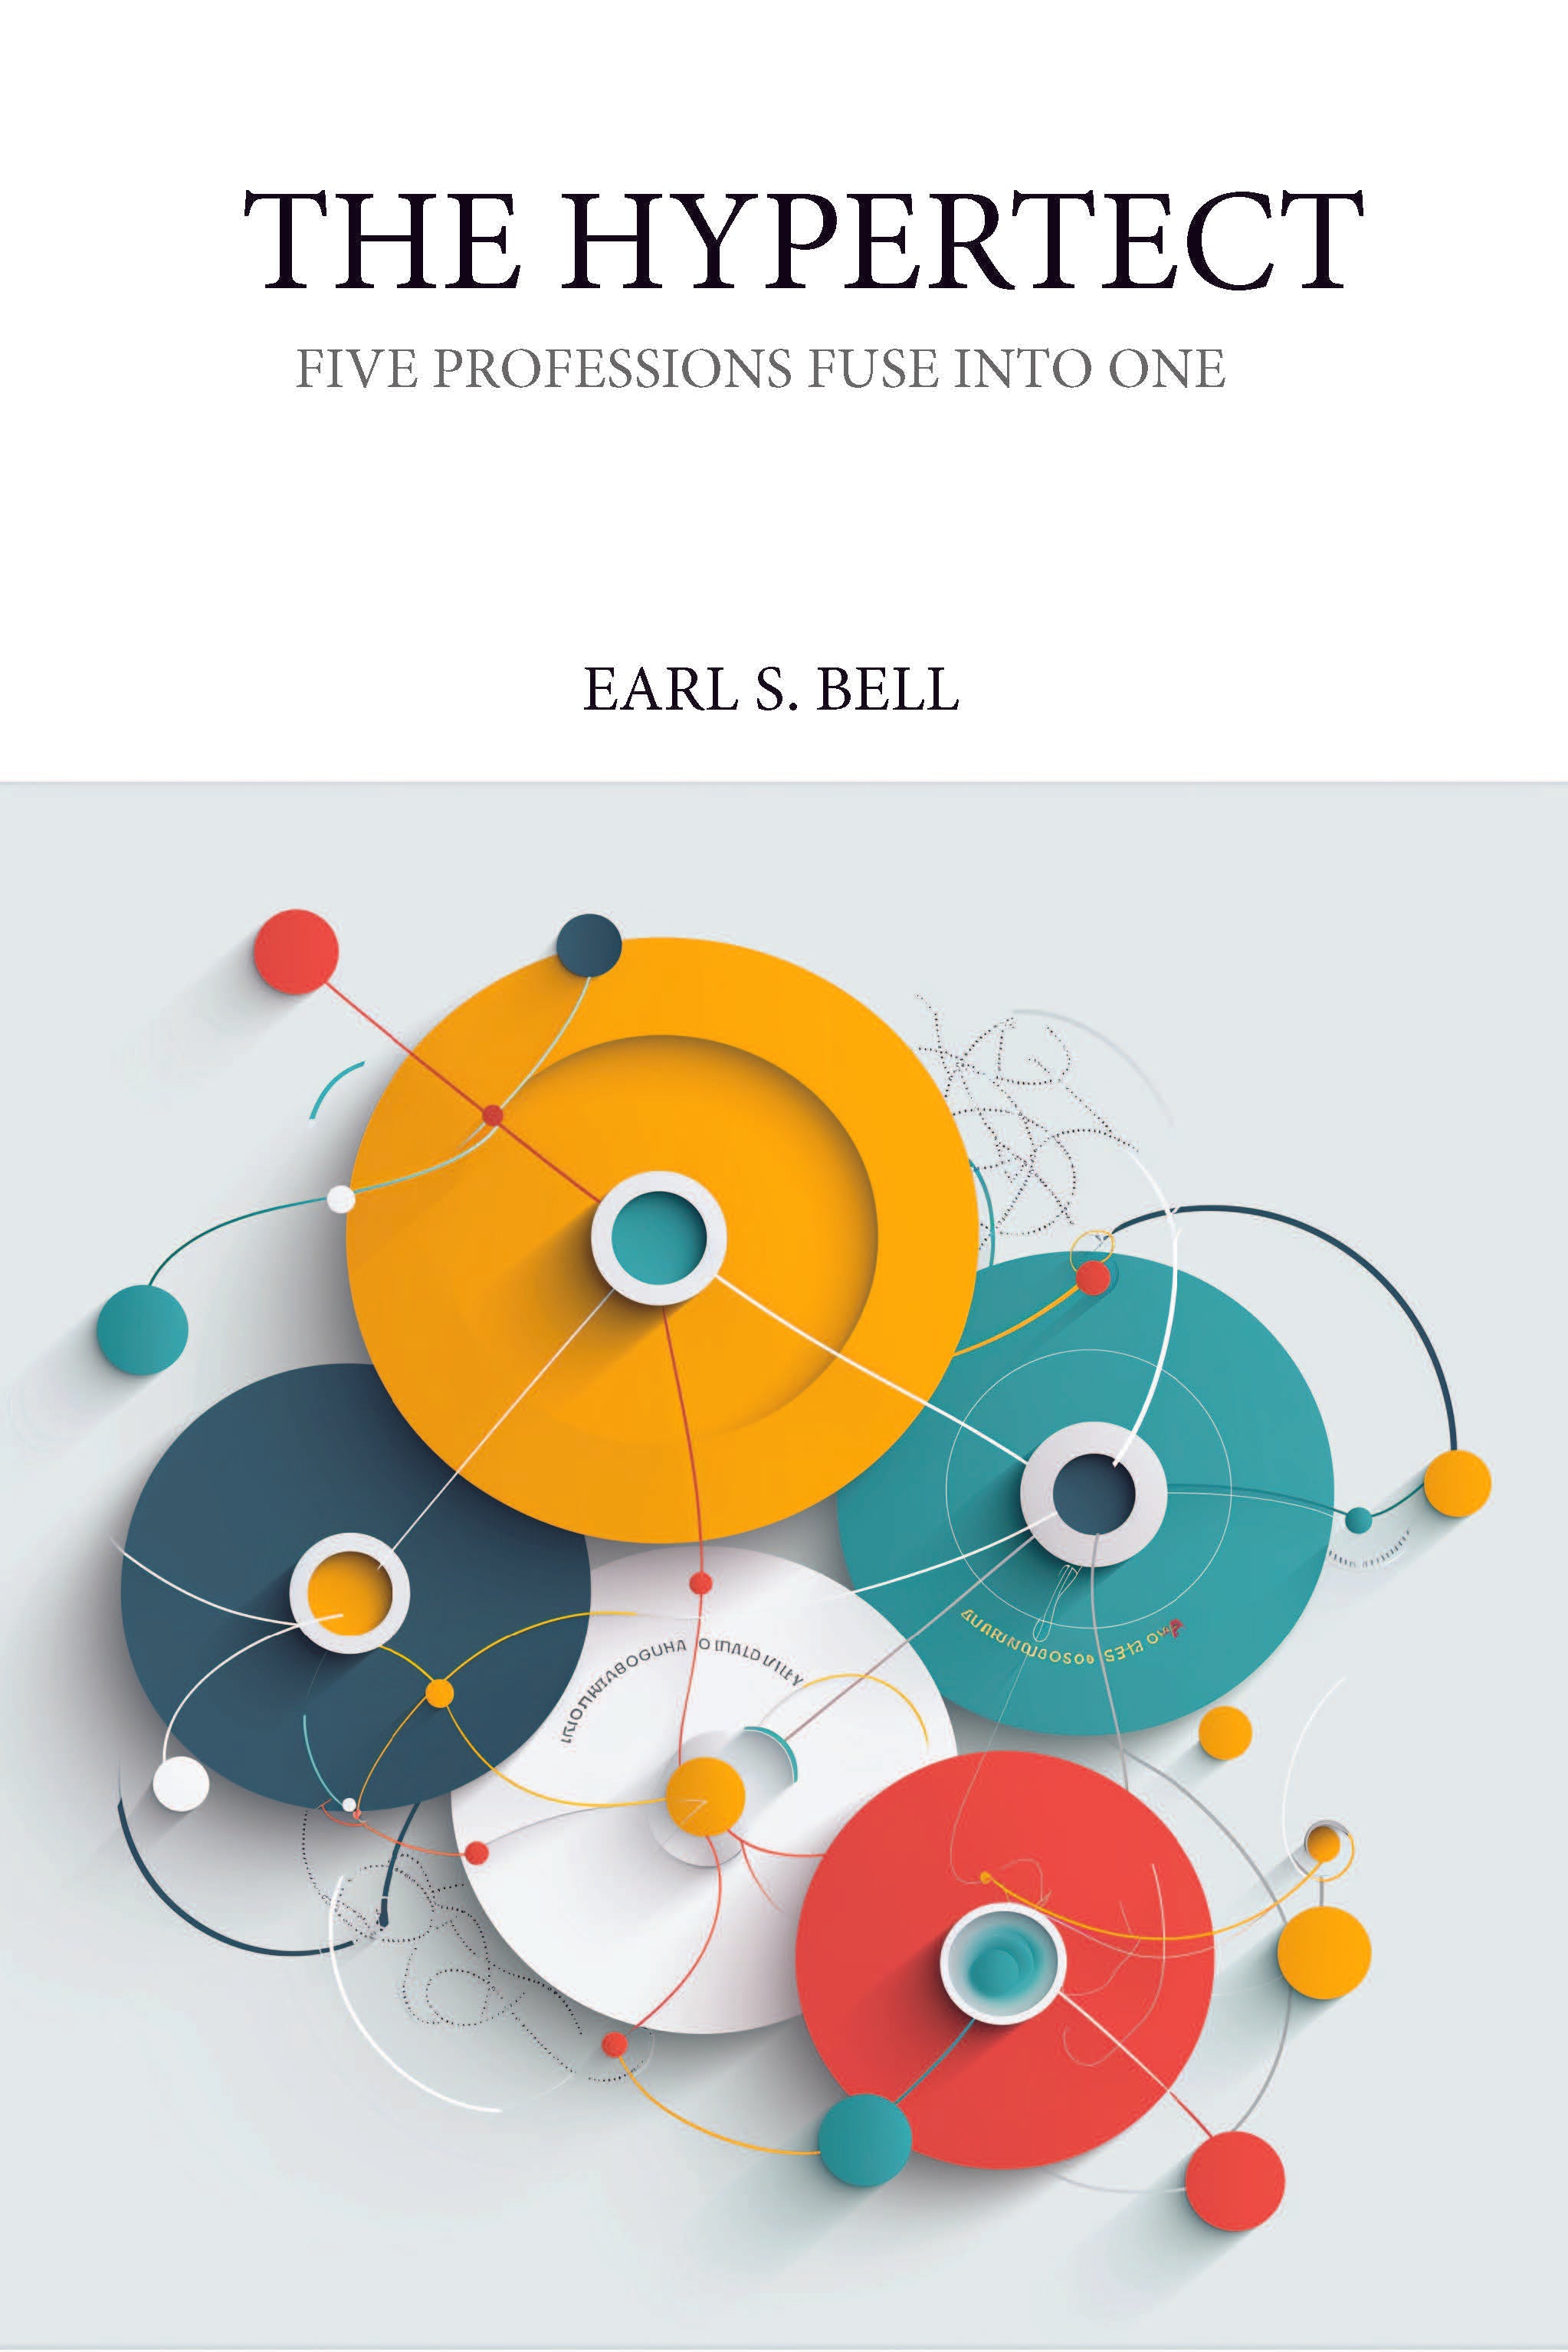 "Embracing the Future with Earl S. Bell's revolutionary 'Hypertecture': A Convergence of Disciplines through AI"